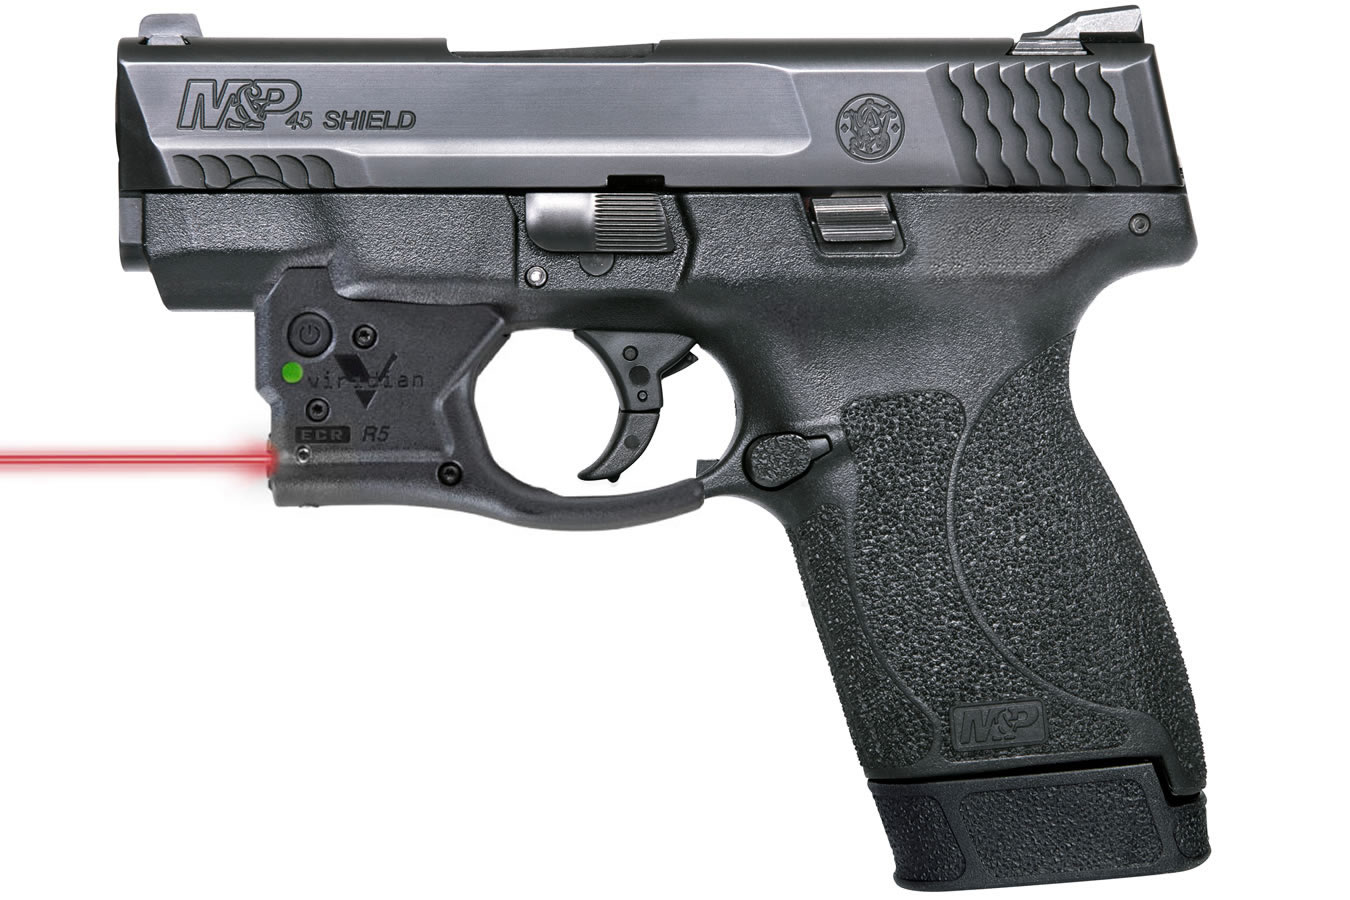 SMITH AND WESSON MP45 SHIELD W/ VIRIDIAN RED LASER